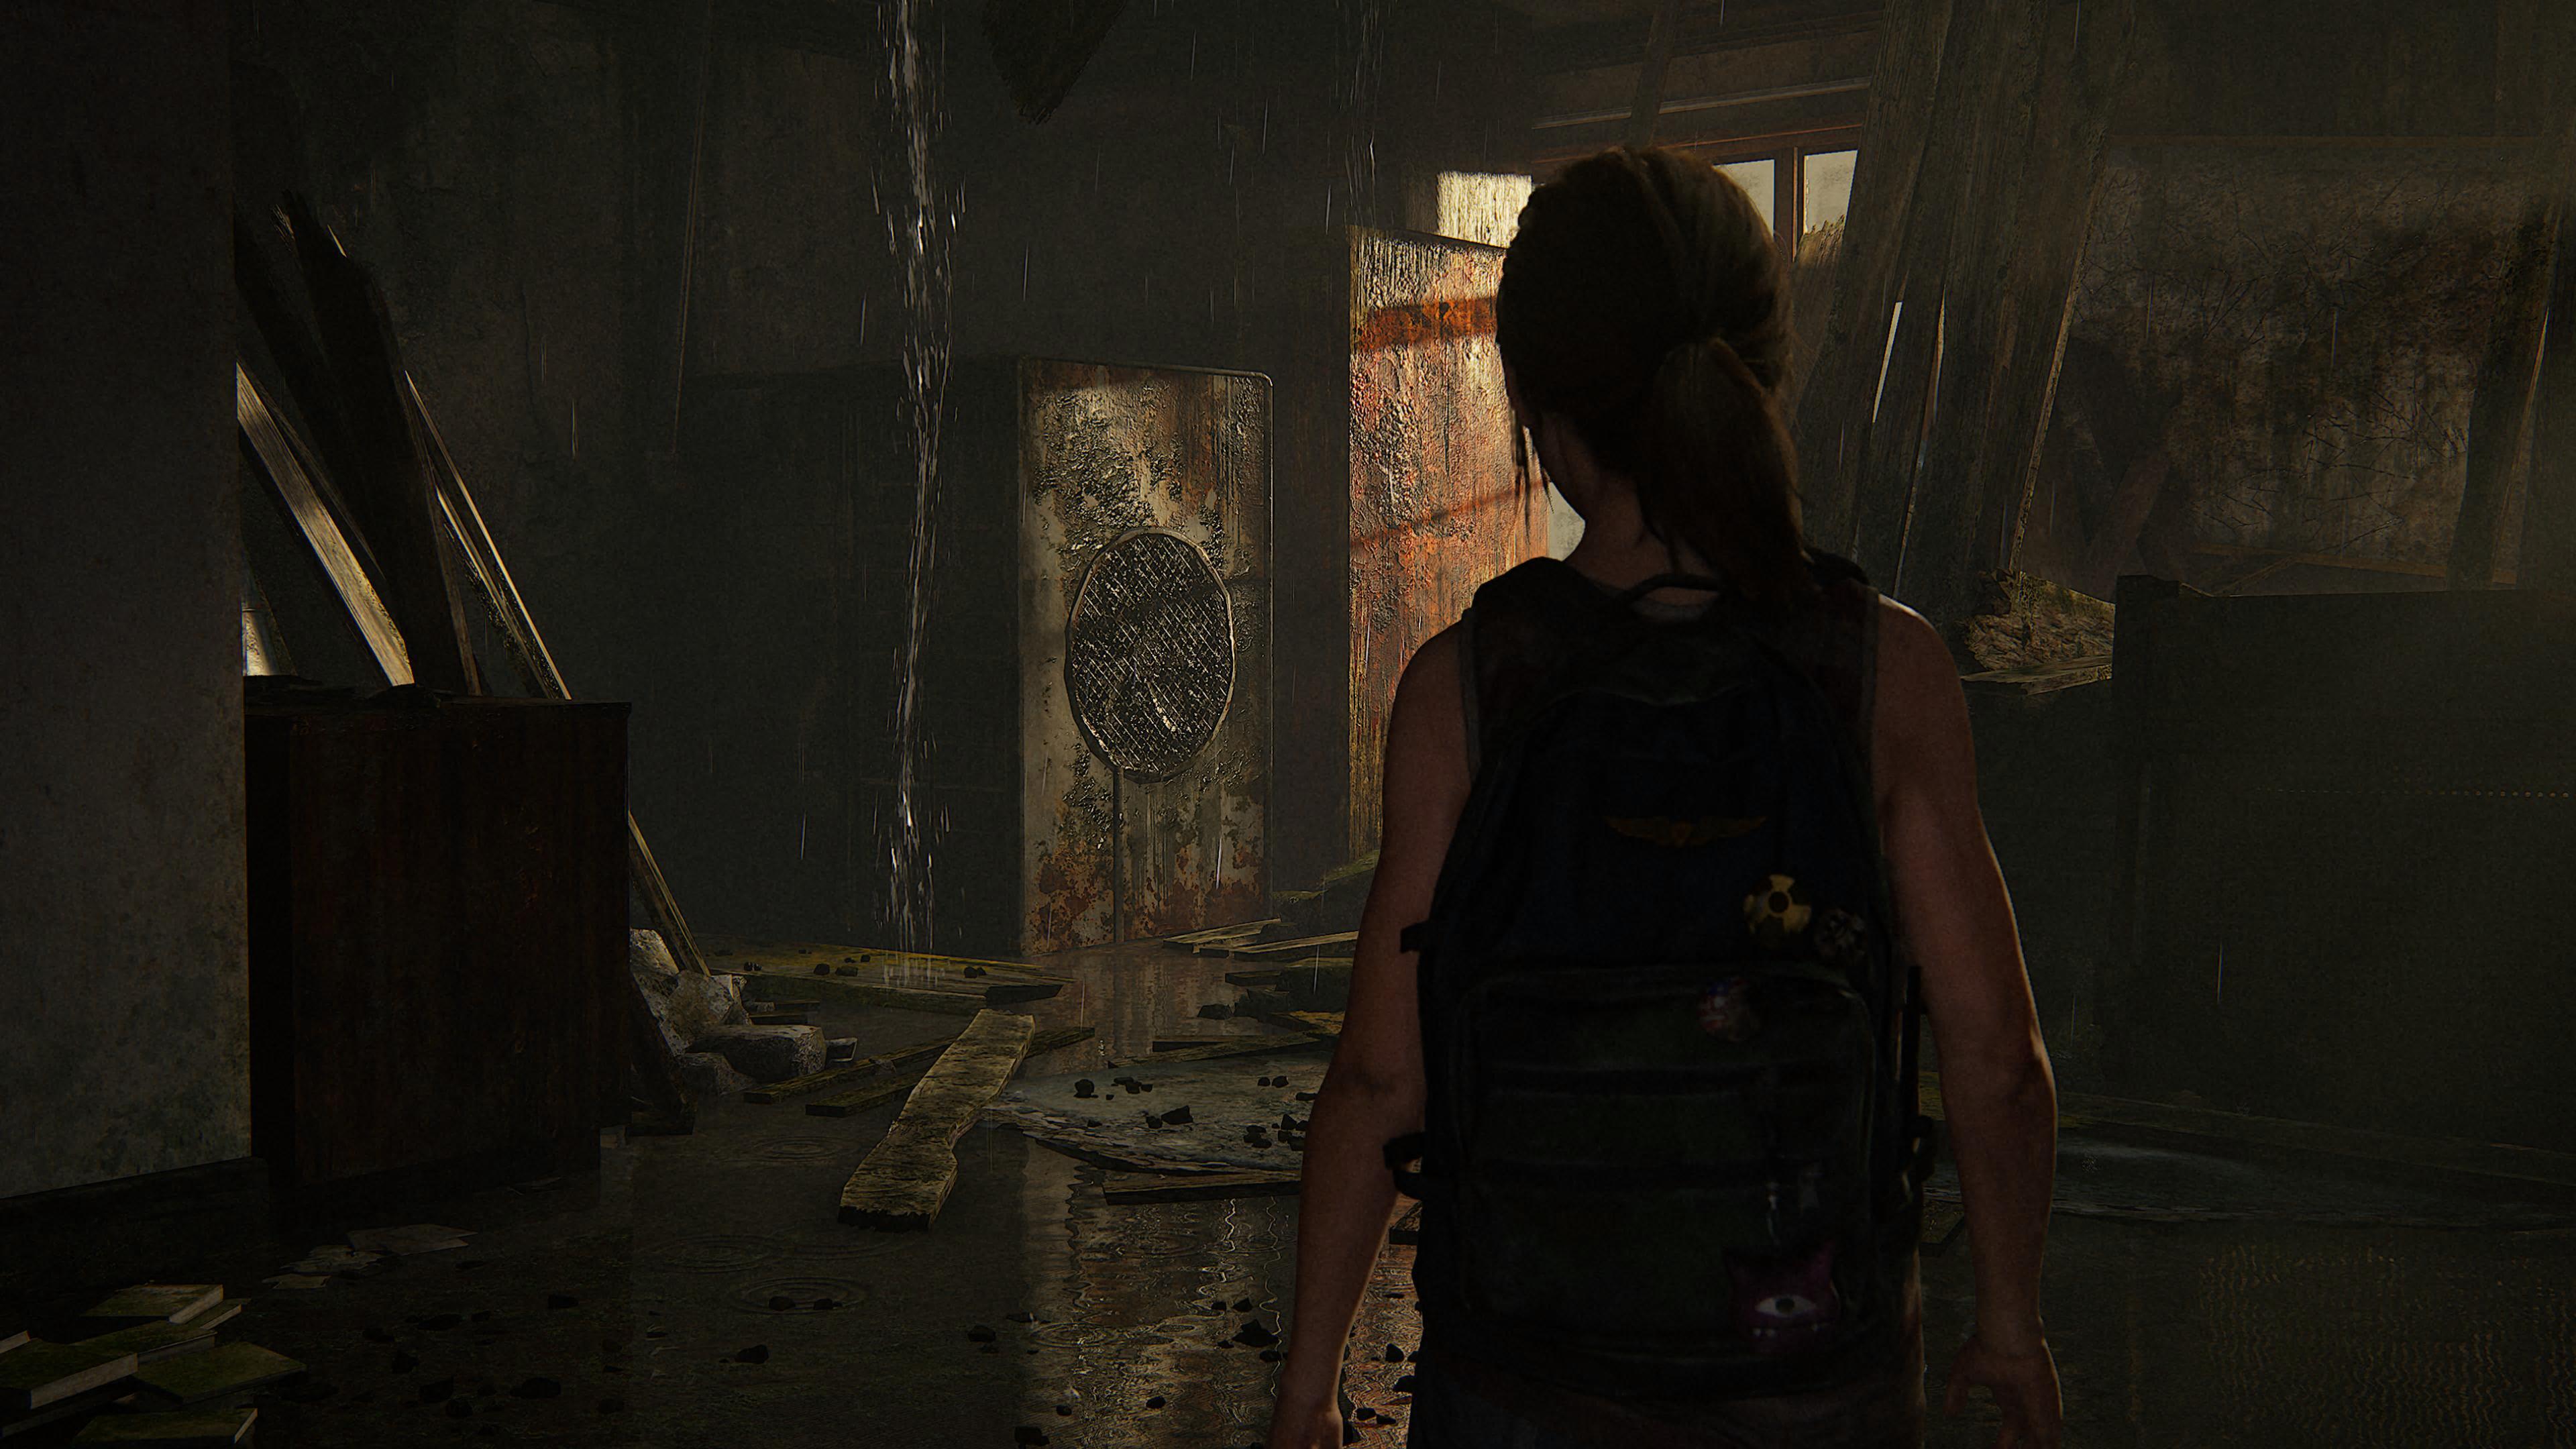 The Last Of Us Part I PS5 And PC Review - Desolation Row - GameSpot